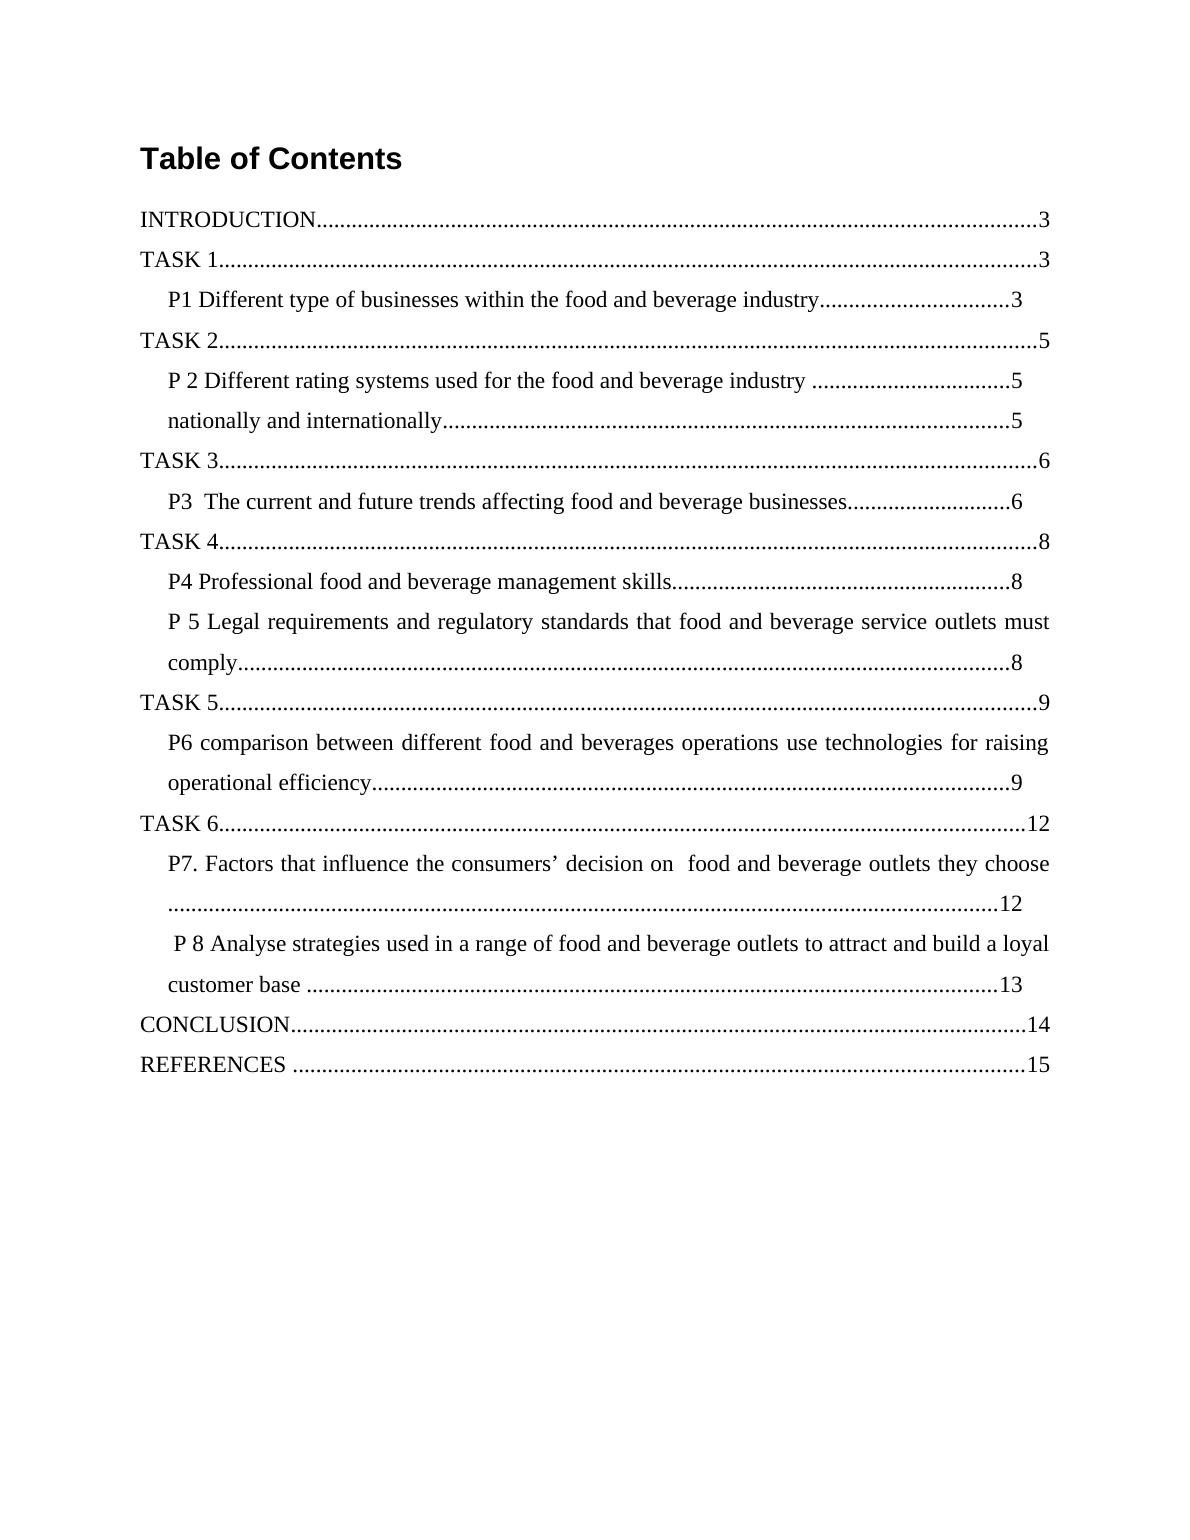 Managing Food and Beverage Operations Assignment - (Doc)_2